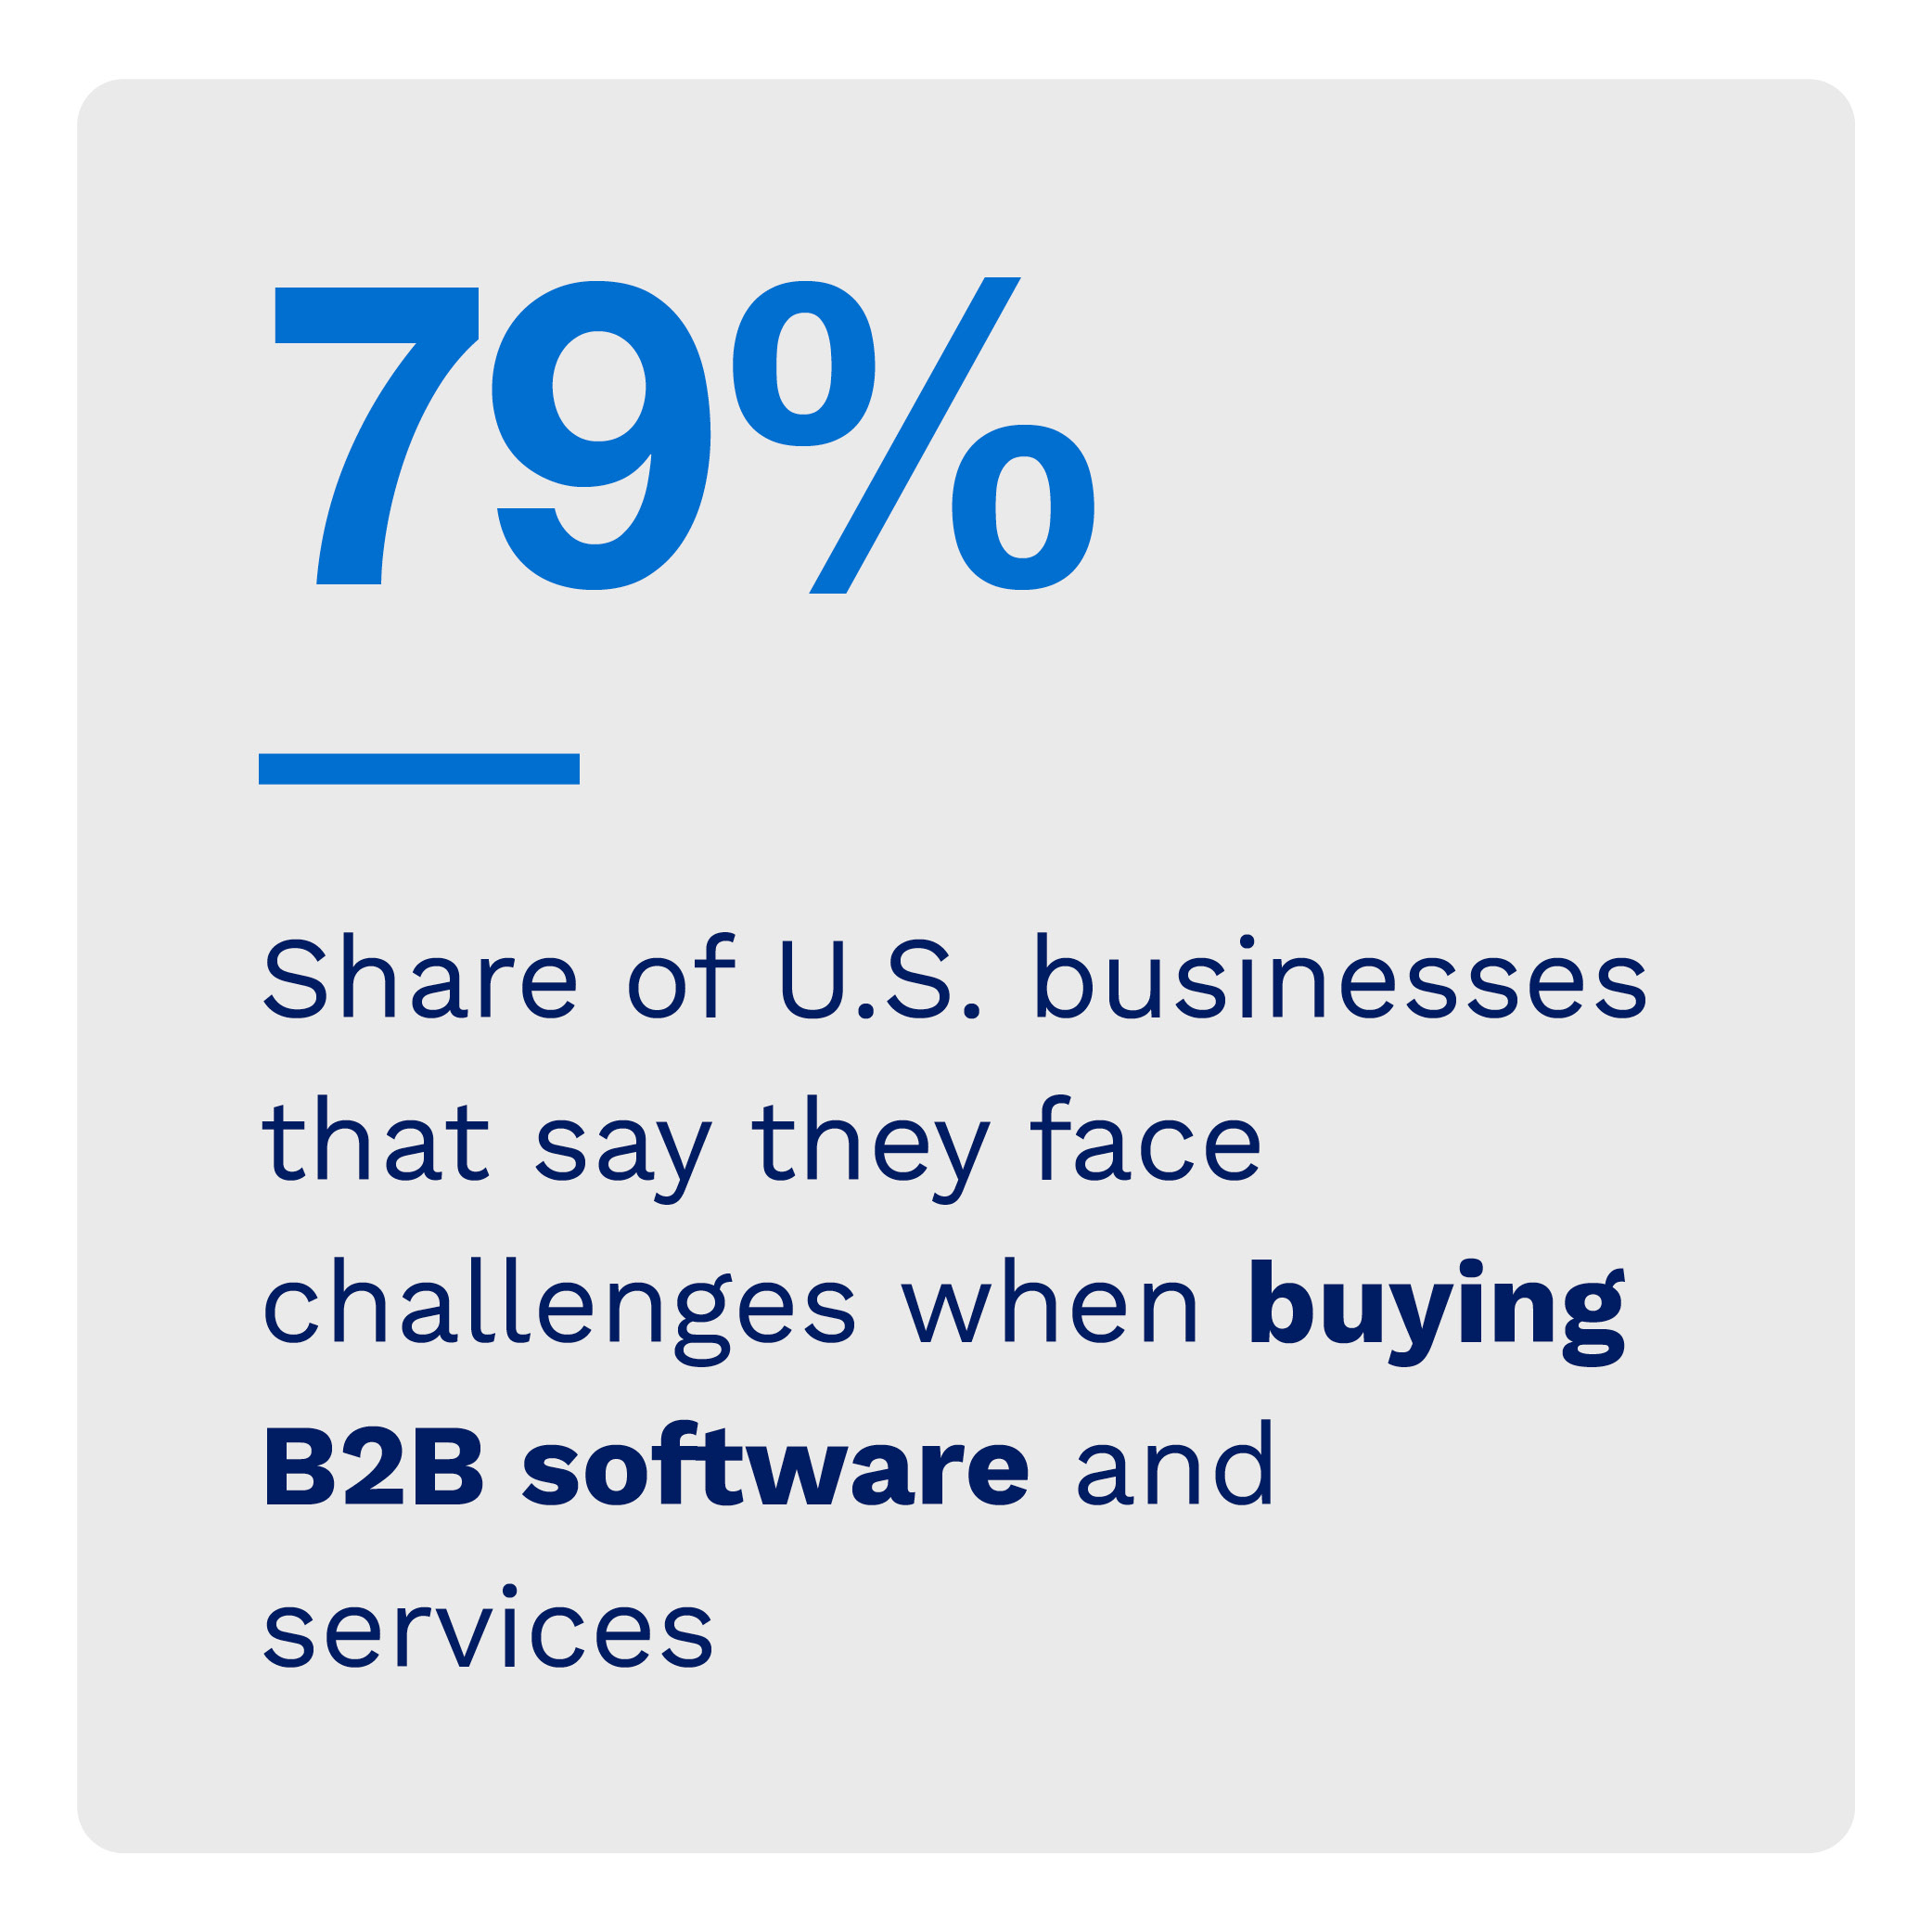 79%: Share of U.S. businesses that say they face challenges when buying B2B software and services